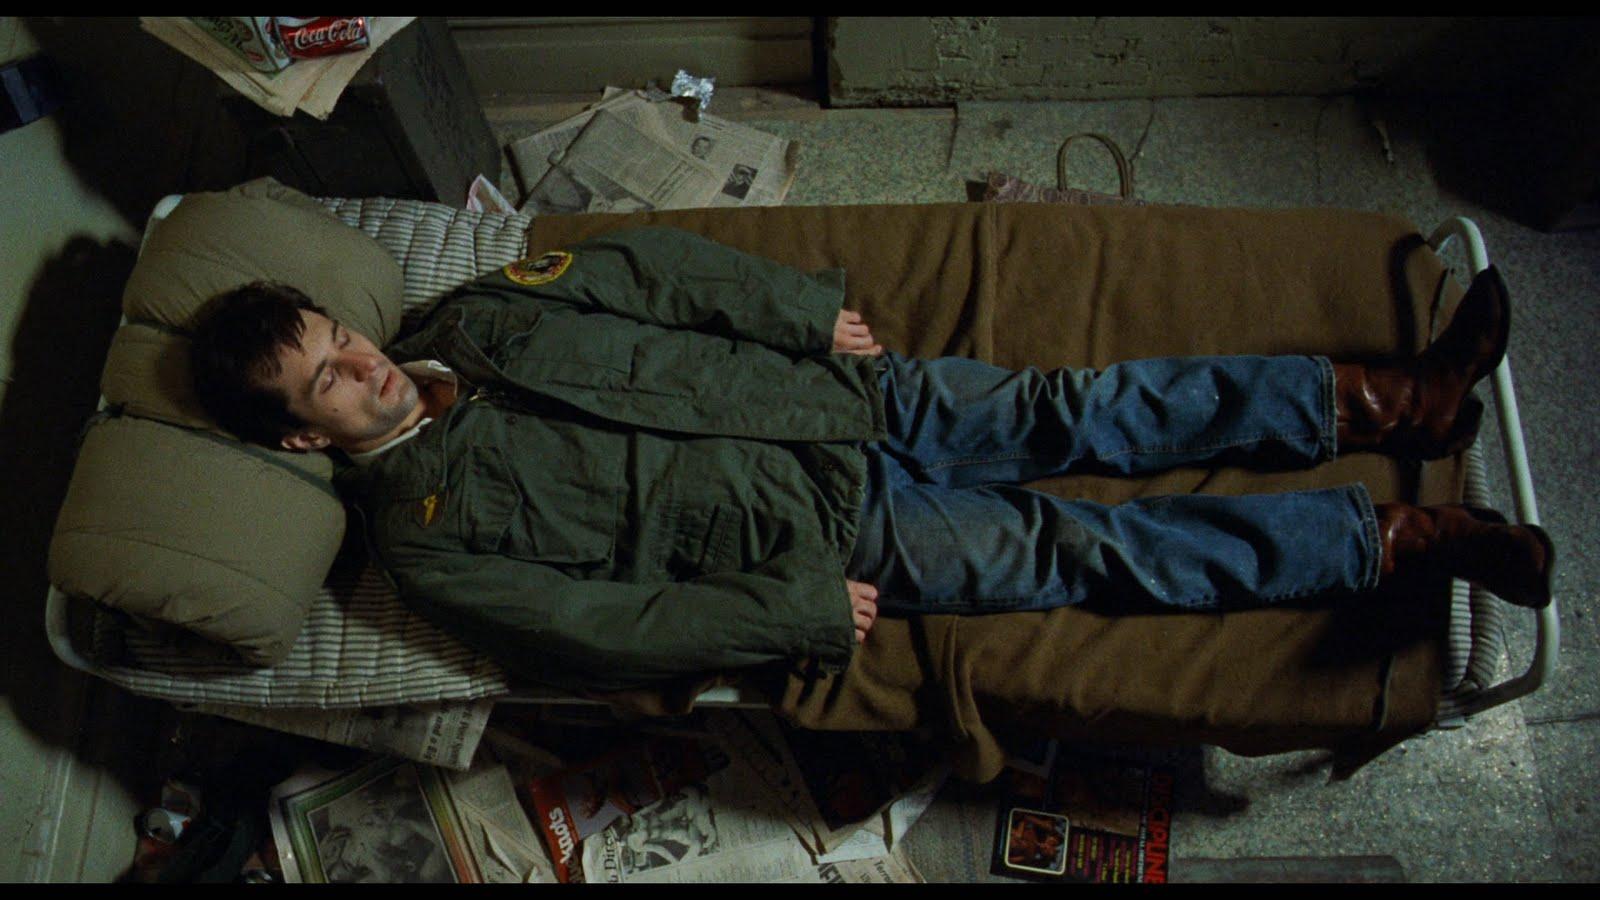 In Taxi Driver (1976), a few references are made of Travis Bickle's service  in the armed forces: when asking for a job, he says he was a marine; his  green M-65 field